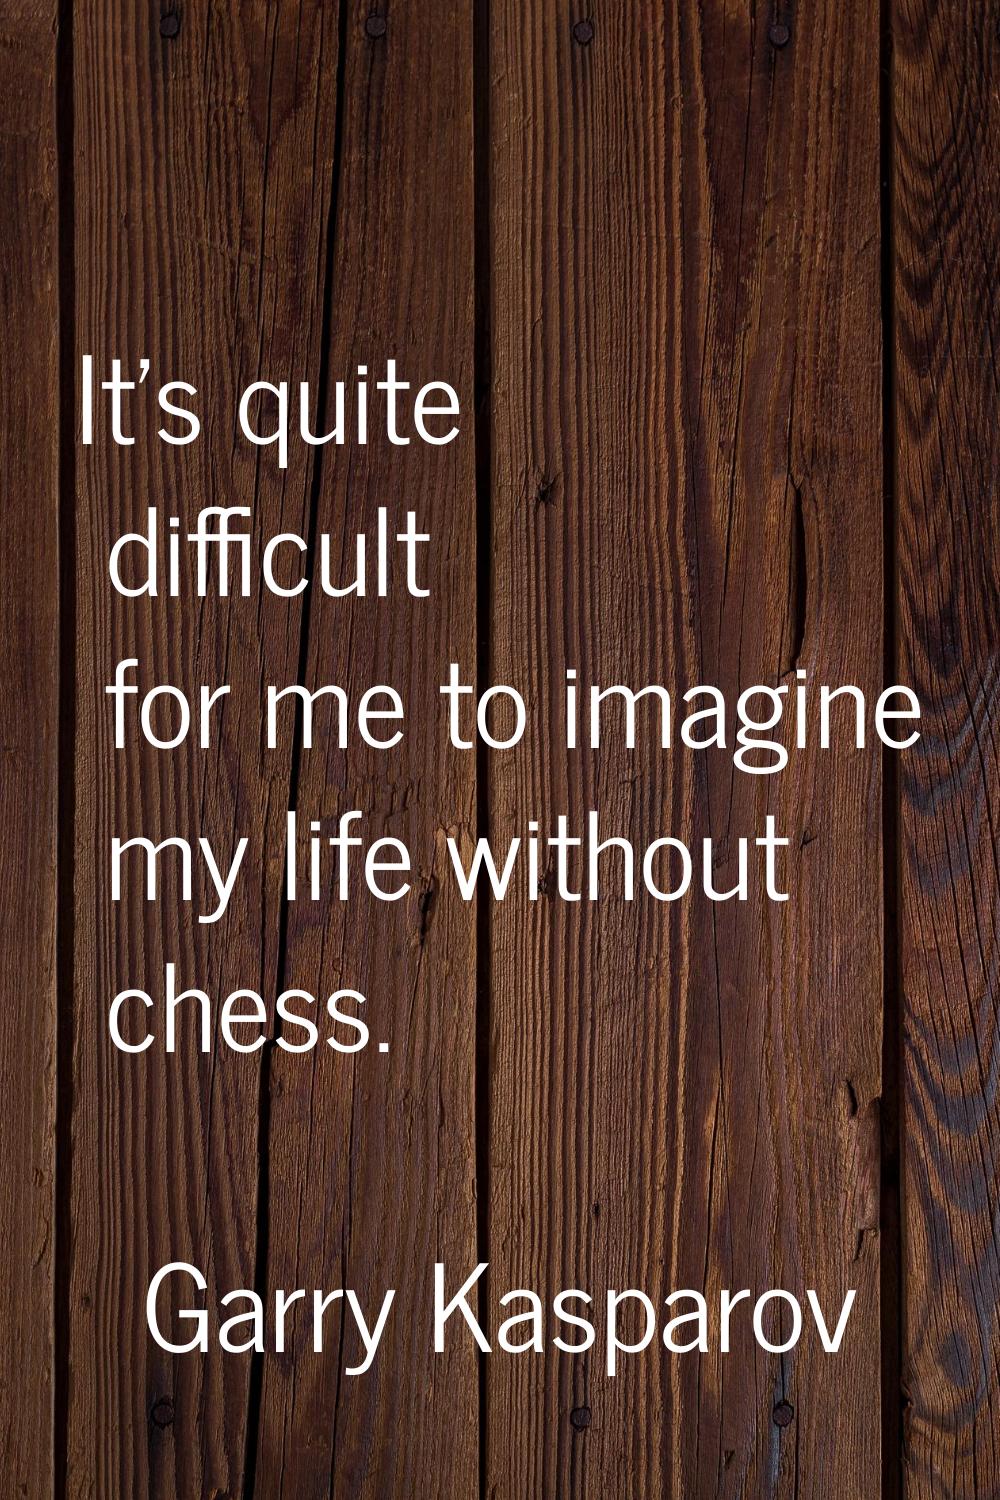 It's quite difficult for me to imagine my life without chess.